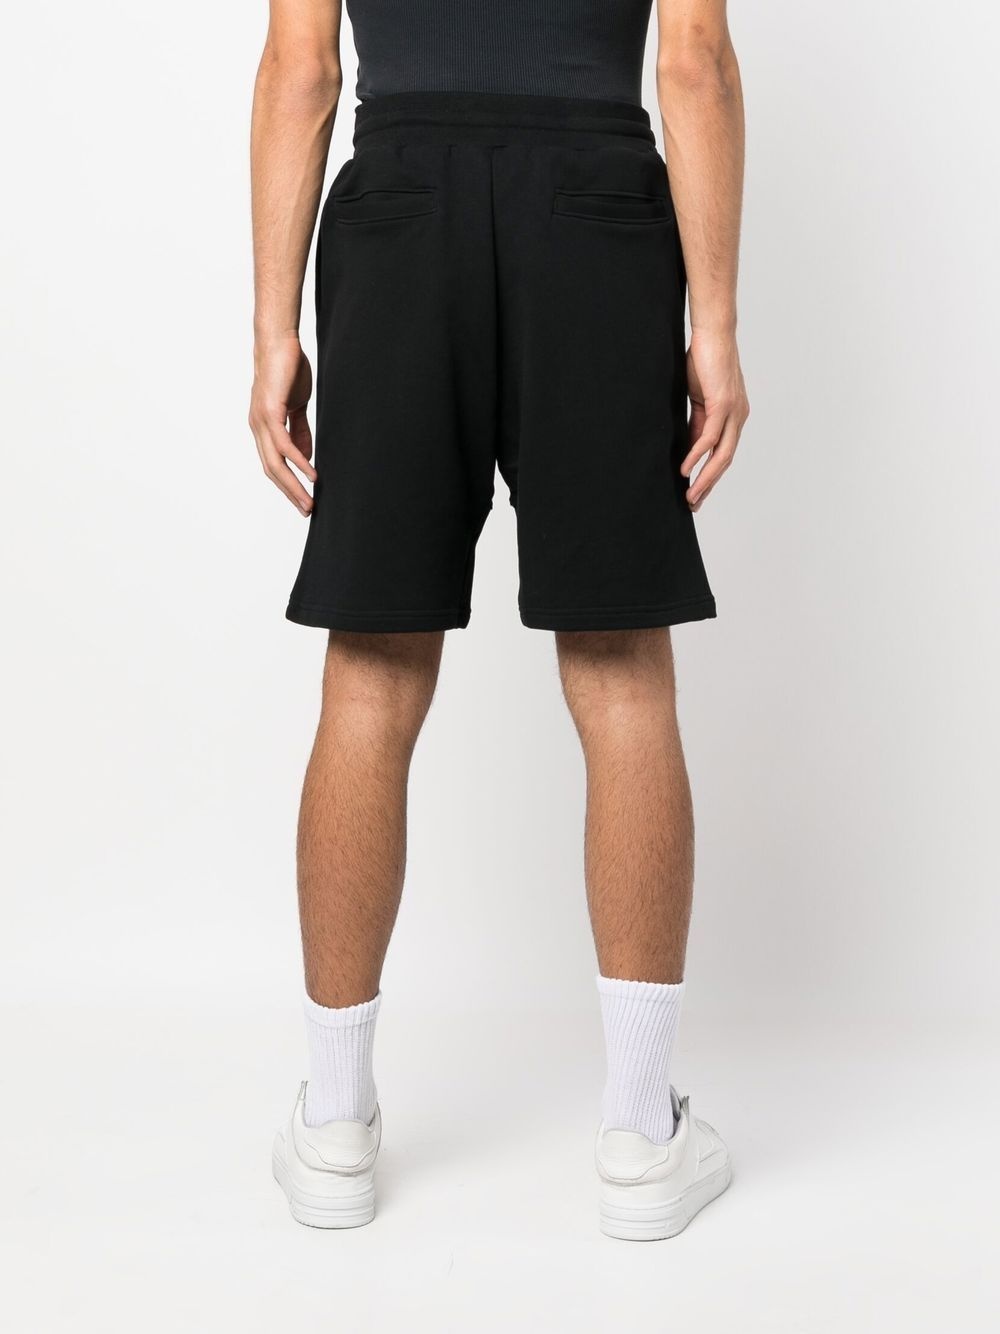 Double Question Mark track shorts - 4